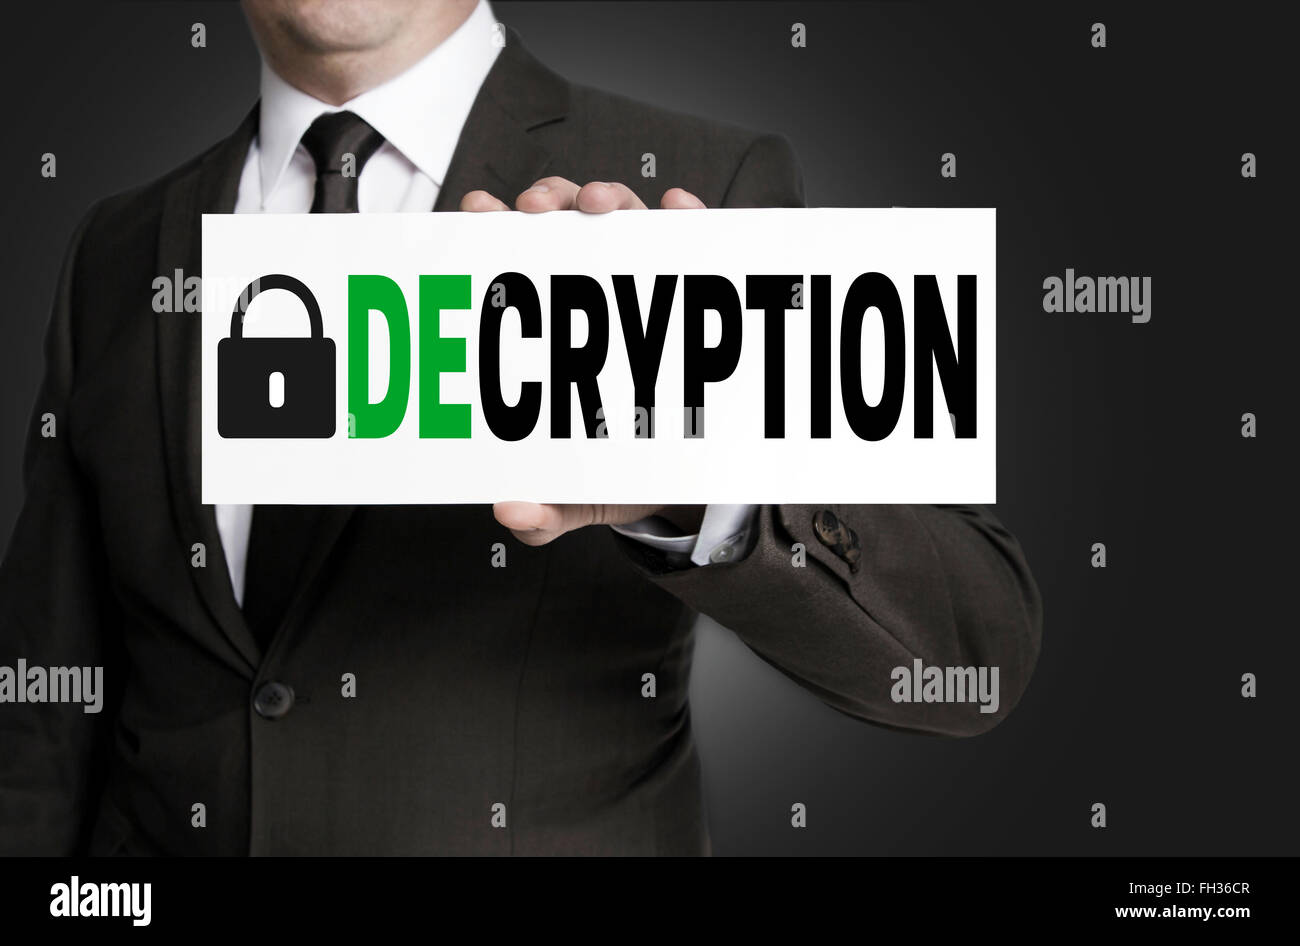 decryption sign is held by businessman. Stock Photo